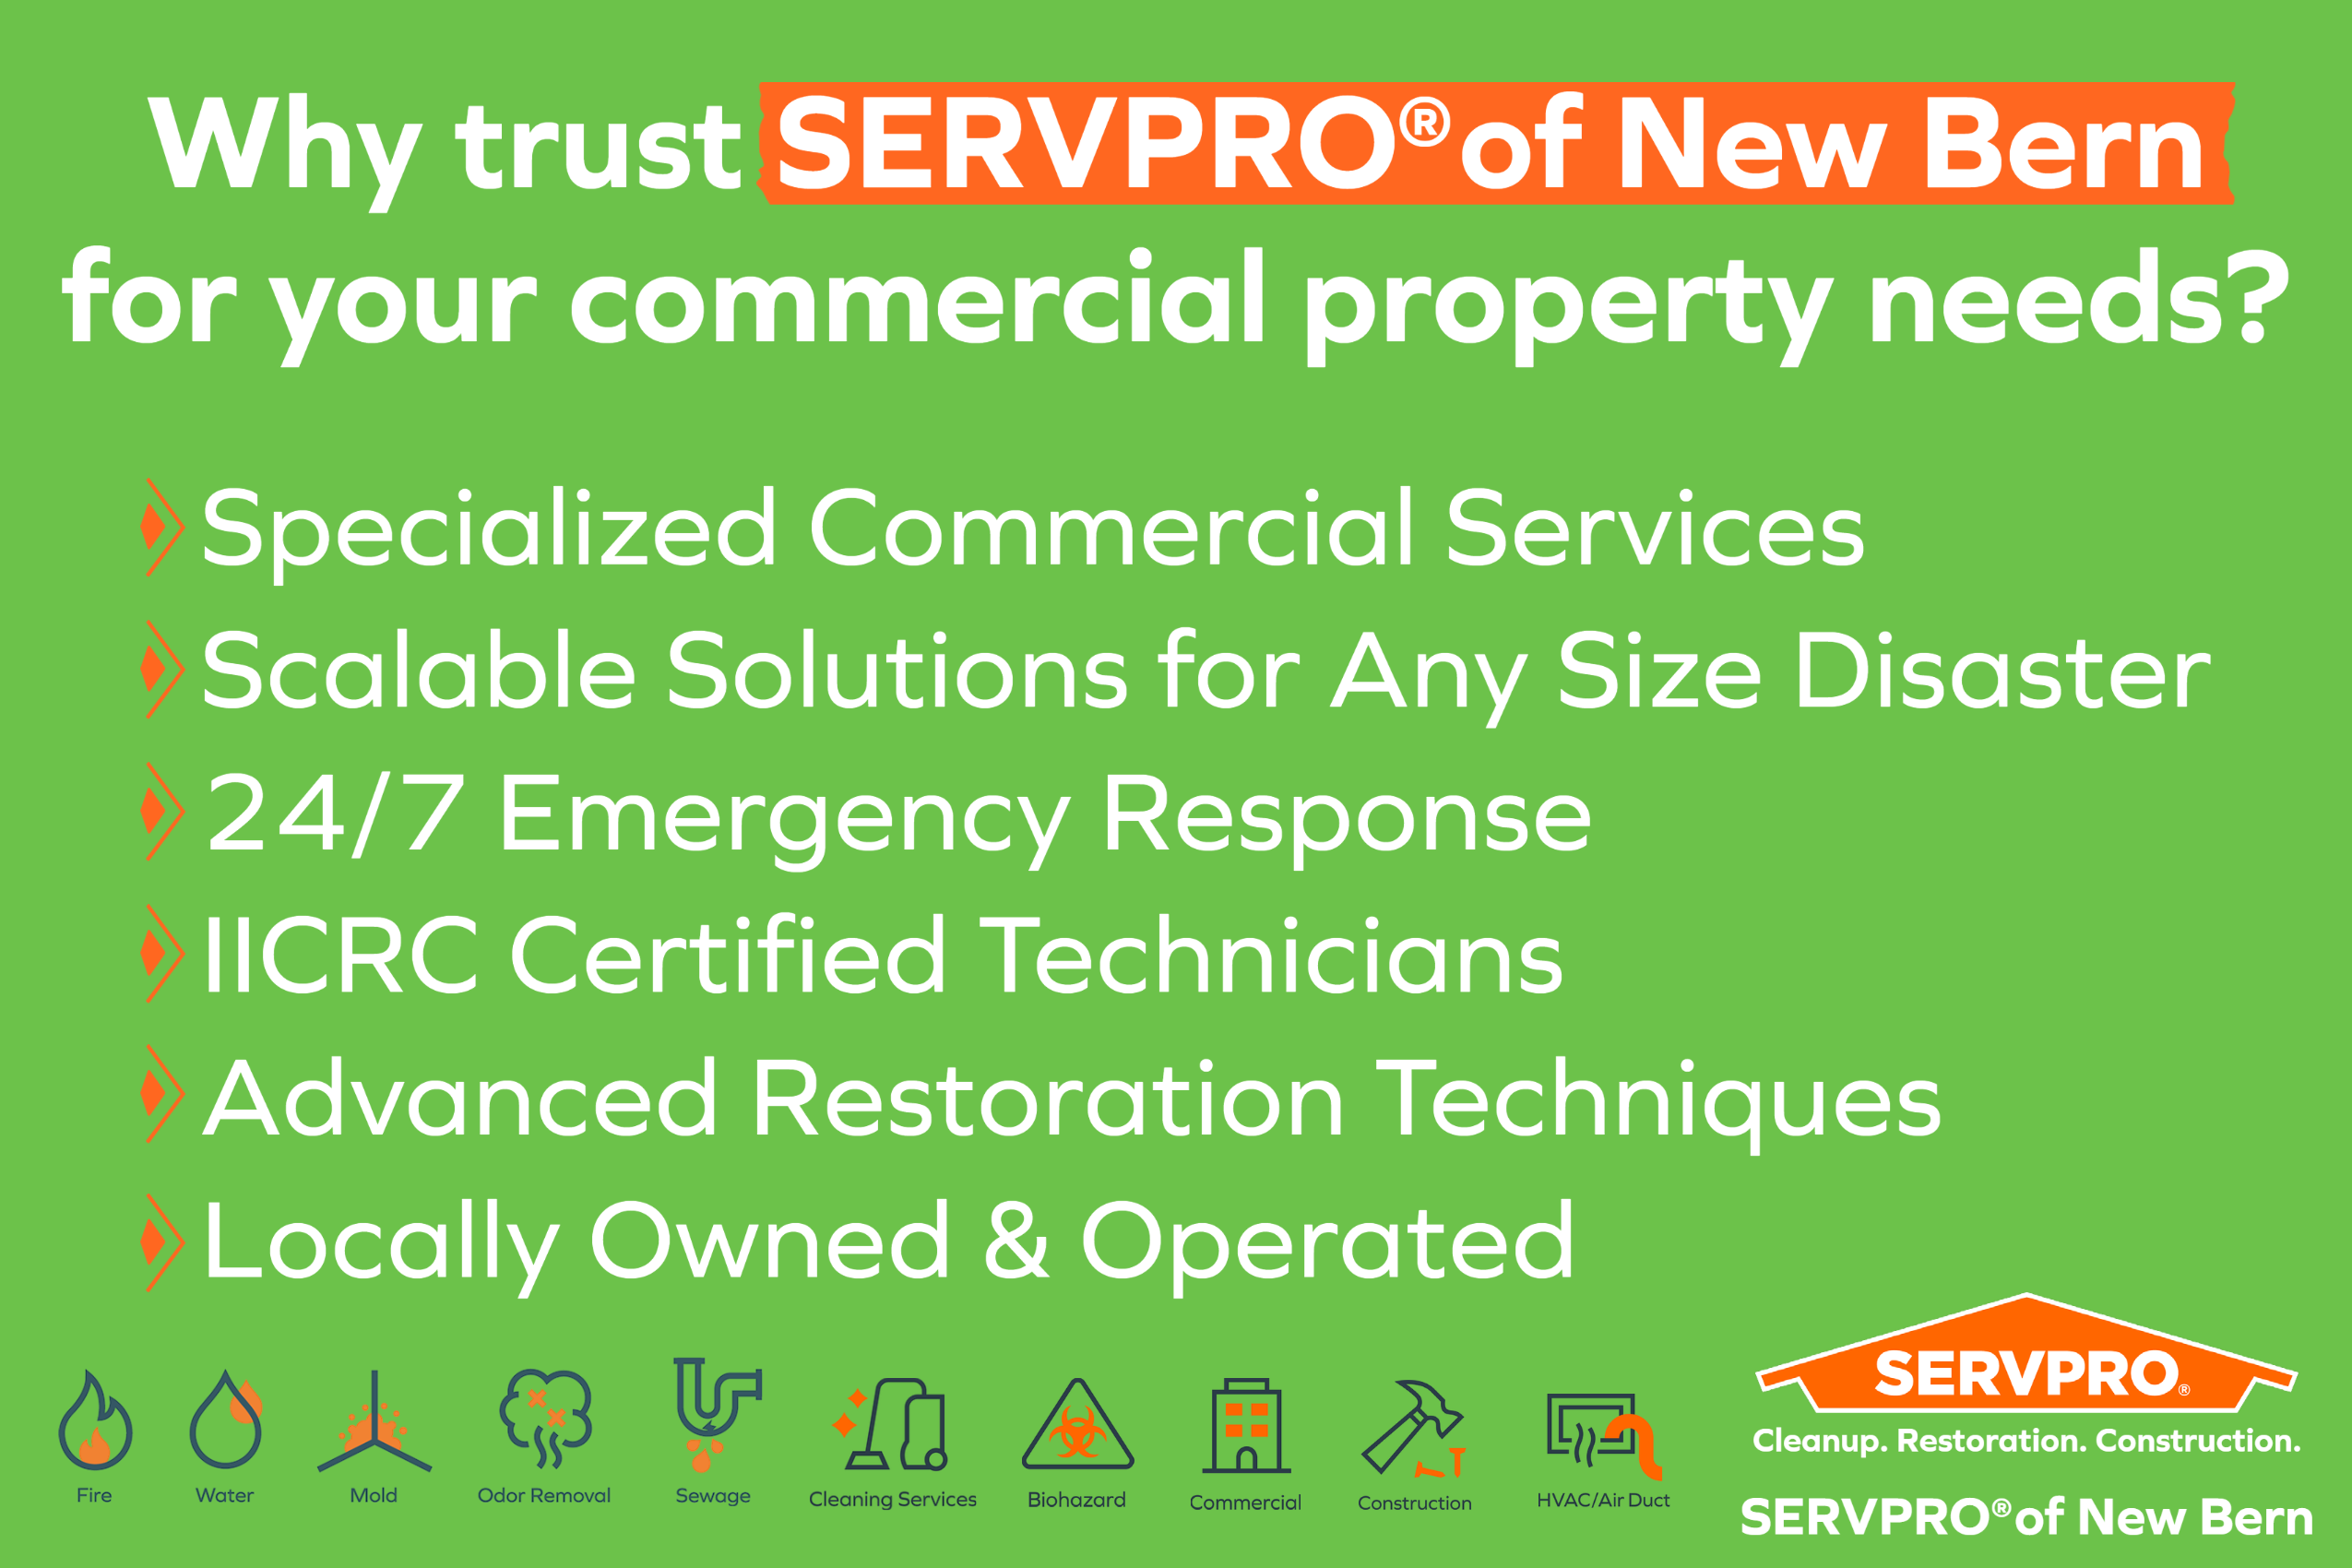 When disaster strikes your business, every minute counts. At SERVPRO® of New Bern, we understand the urgency and the intricacies involved in handling commercial losses. We're available 24/7, ensuring an immediate response to minimize damage, reduce downtime and get your business back in operation as quickly as possible.